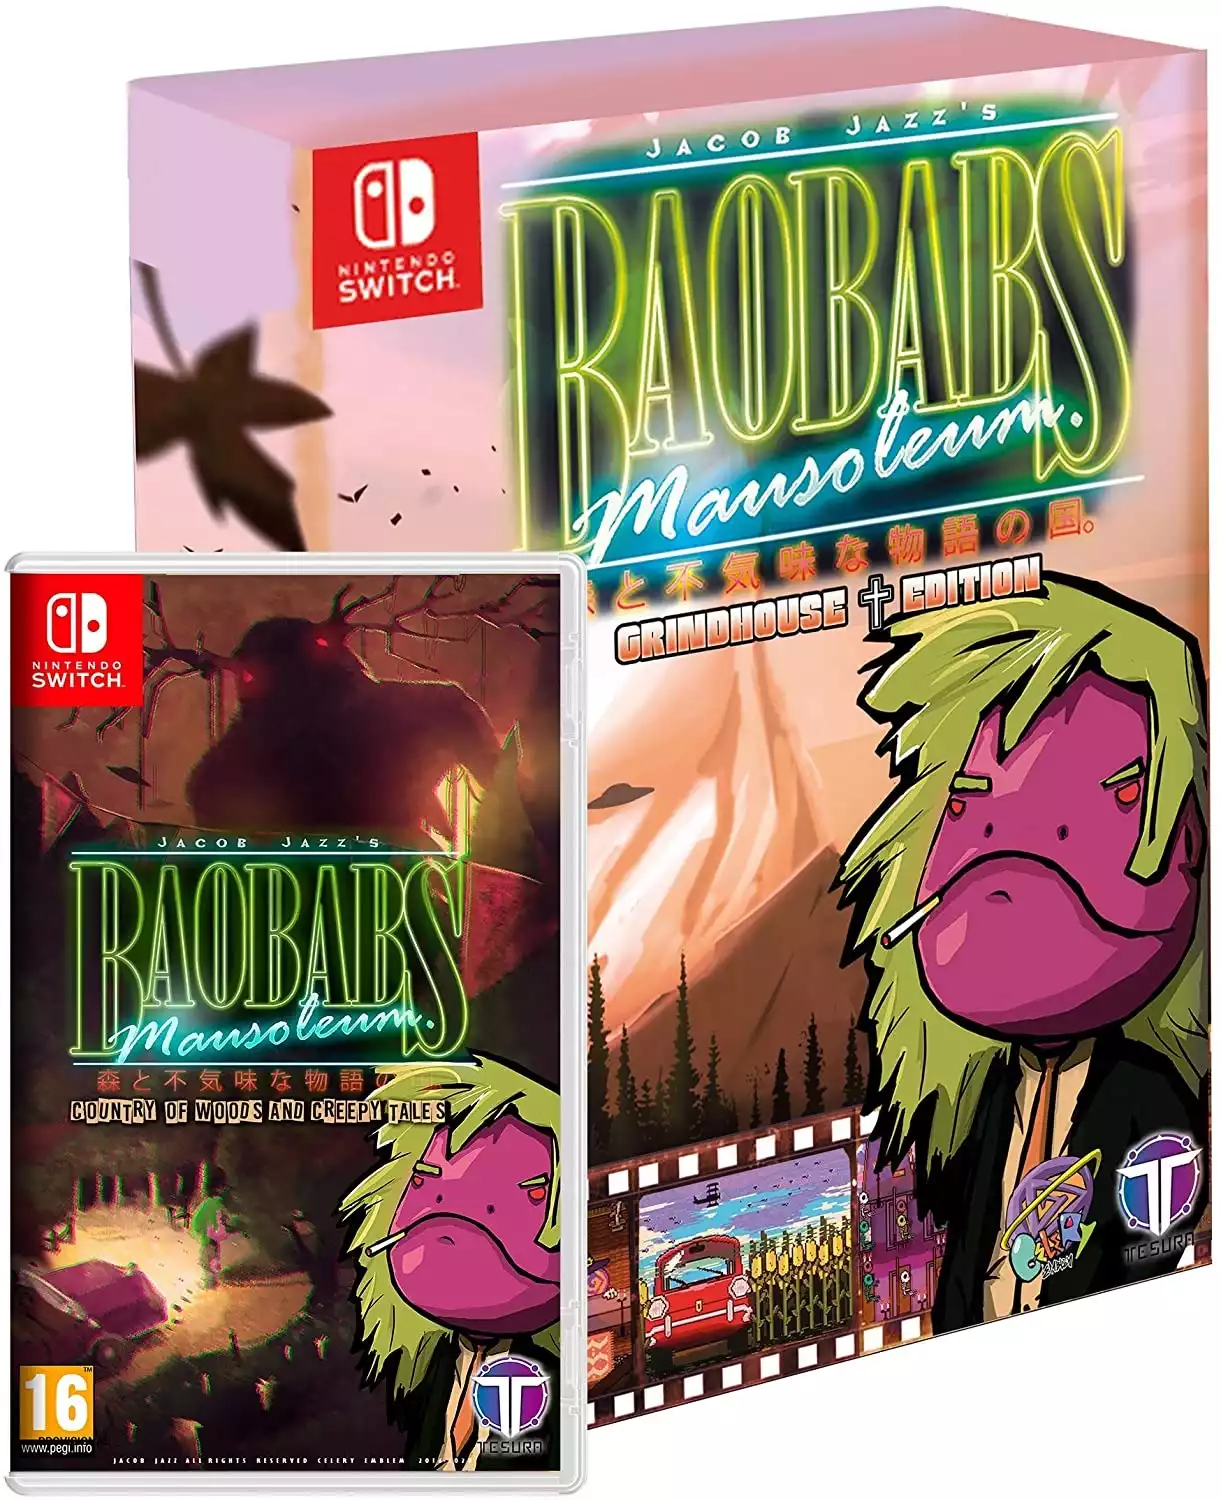 Igra Baobabs Mausoleum: Country of Woods and Creepy Tales - Grindhouse Edition za Nintendo Switch